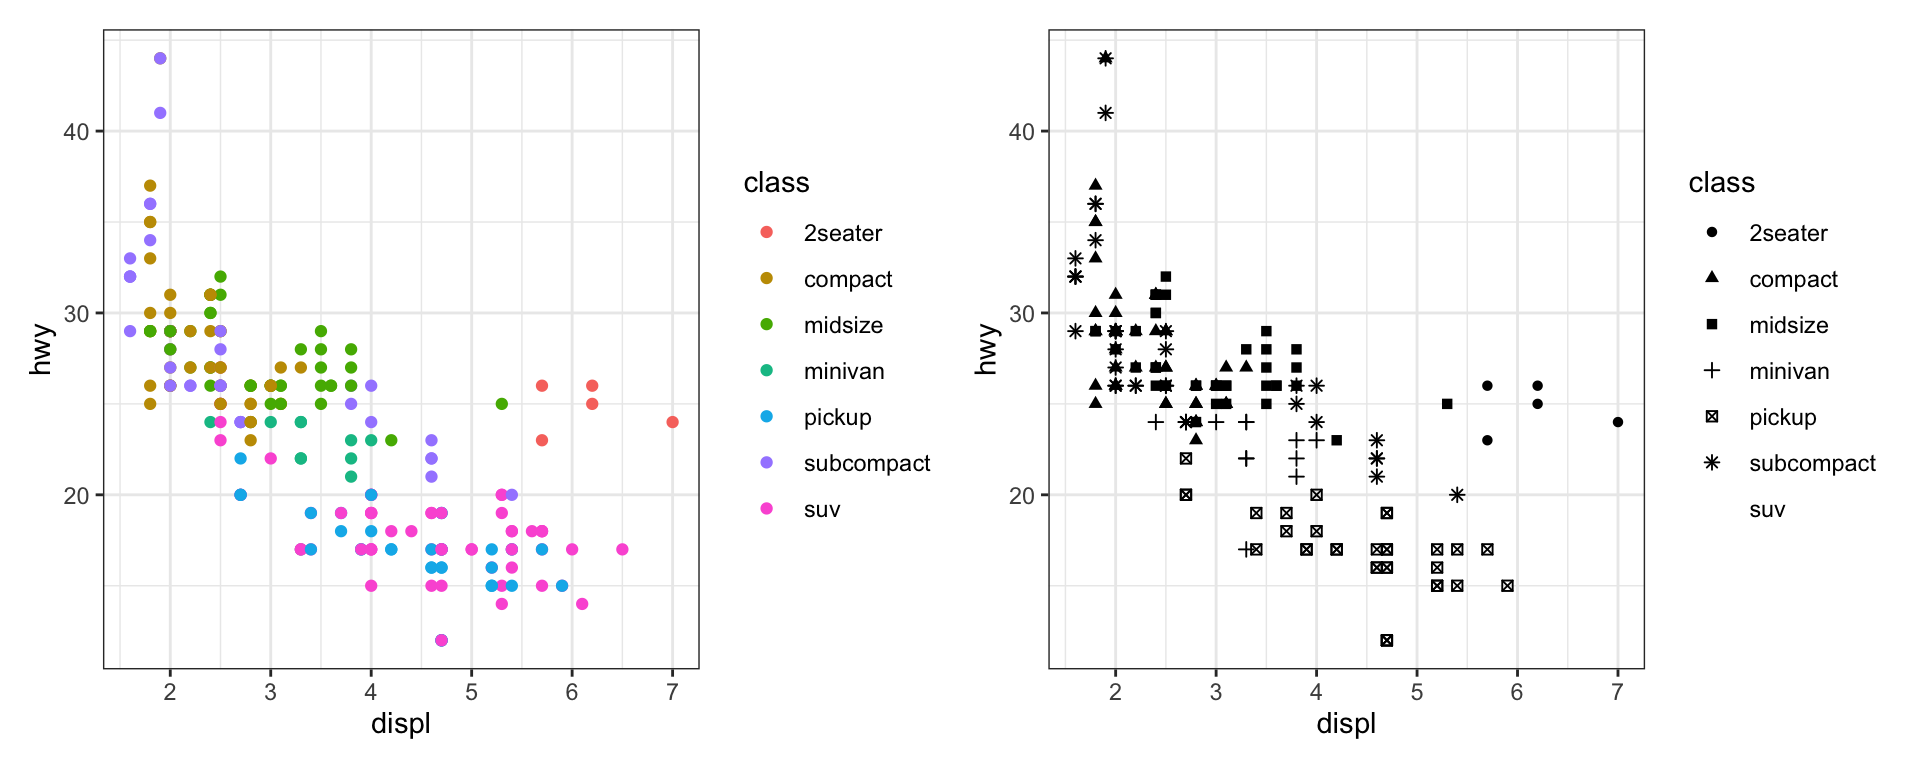 Two scatterplots next to each other, both visualizing highway fuel #|   efficiency versus engine size of cars and showing a negative
association. In the plot on the left class is mapped to the color
aesthetic, resulting in different colors for each class.
In the plot on the right class is mapped the shape aesthetic,
resulting in different plotting character shapes for each class,
except for suv. Each plot comes with a legend that shows the
mapping between color or shape and levels of the class variable.